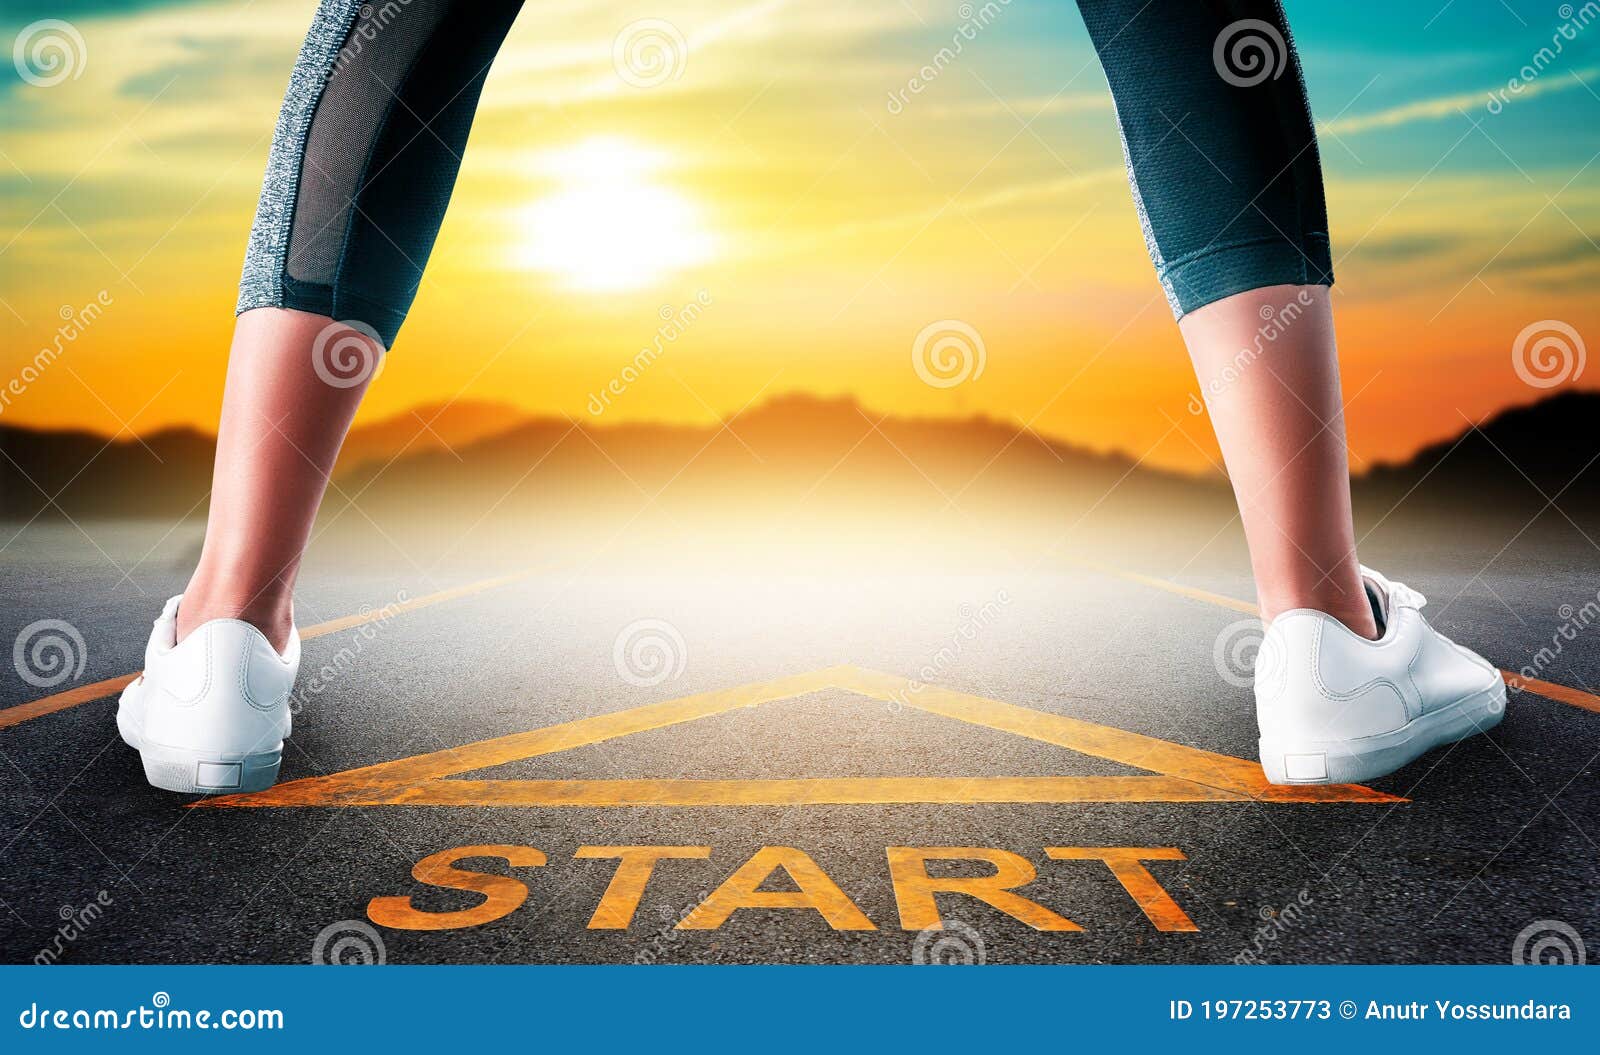 woman runner standing on a start sign ready to run to goal and freedom on sunset sky for motivation begining concept